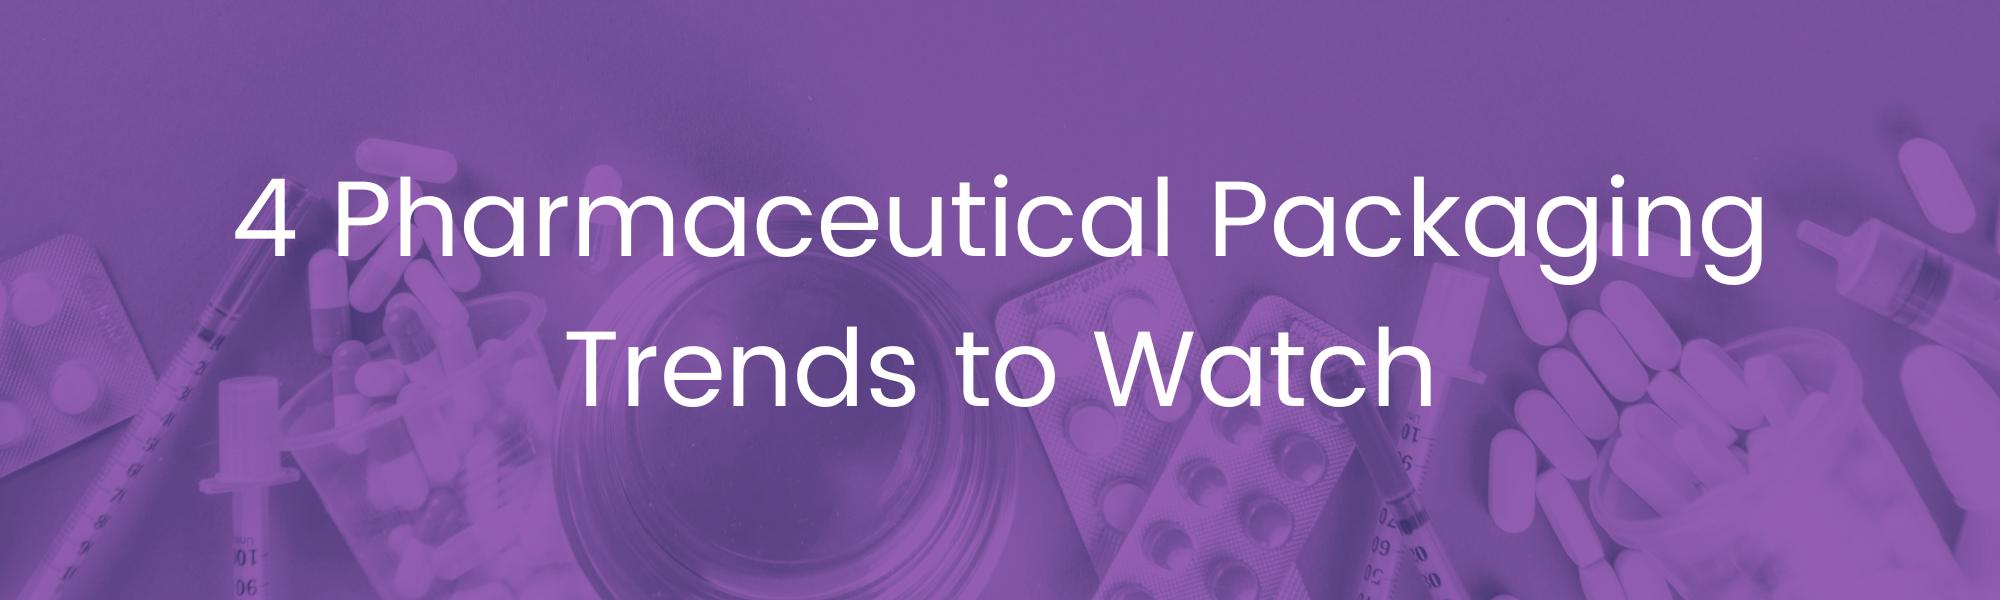 Text: 4 Pharmaceutical Packaging Trends to Watch